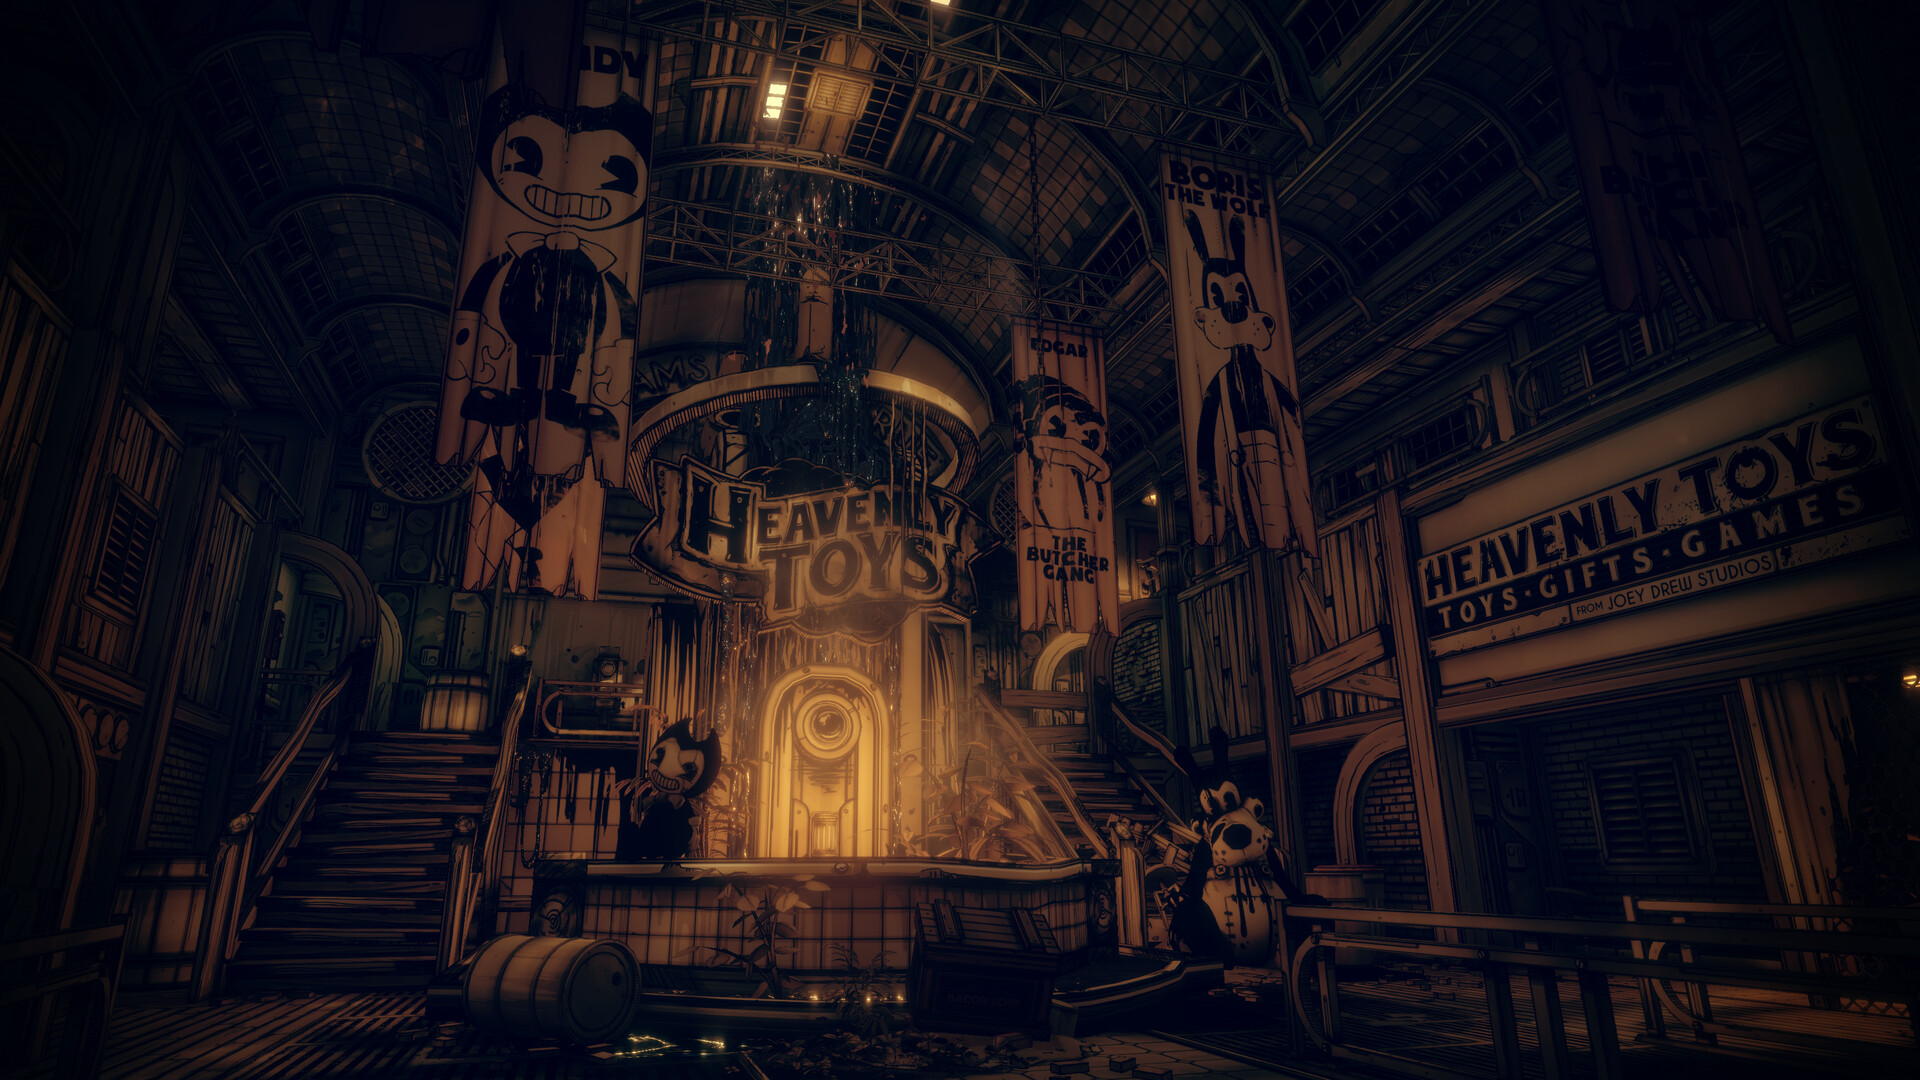 five nights with anime bendy(demo) APK (Android App) - Free Download